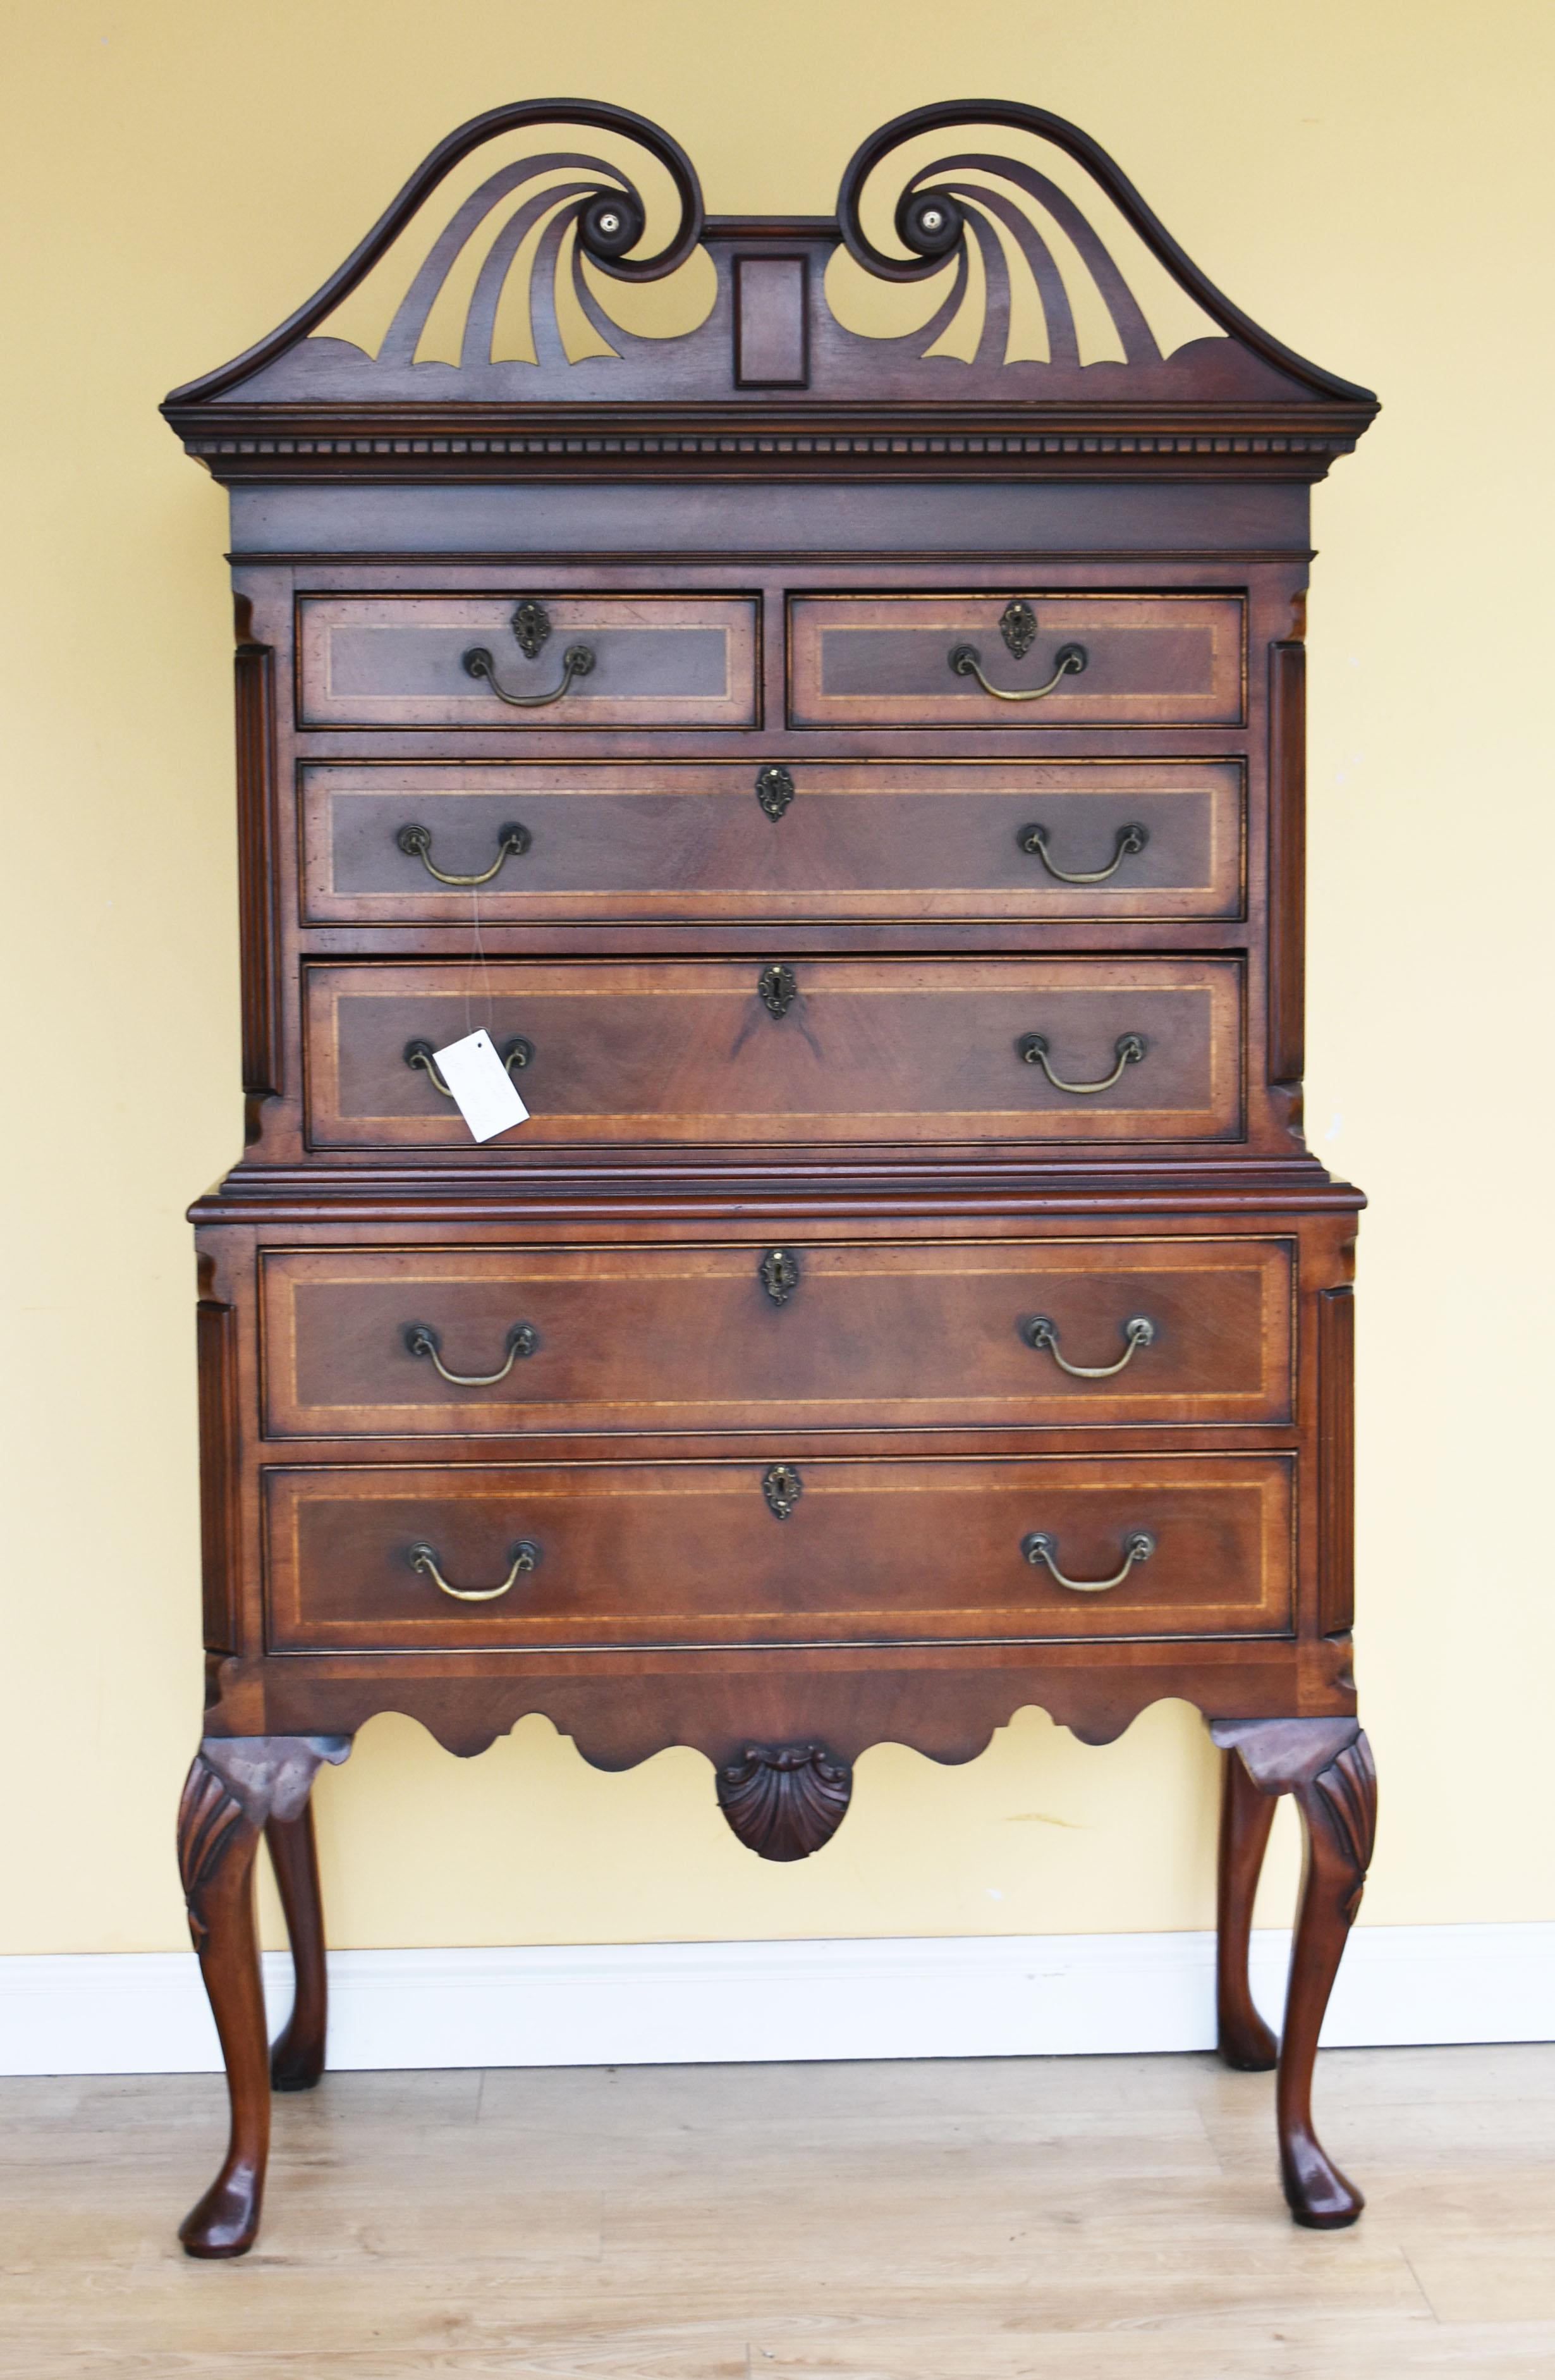 For sale is a good quality Georgian style mahogany chest on stand. The top of the chest has an ornate swan neck pediment above four inlaid and banded drawers, over a further two long drawers in the base below, all flanked by canted corners. The